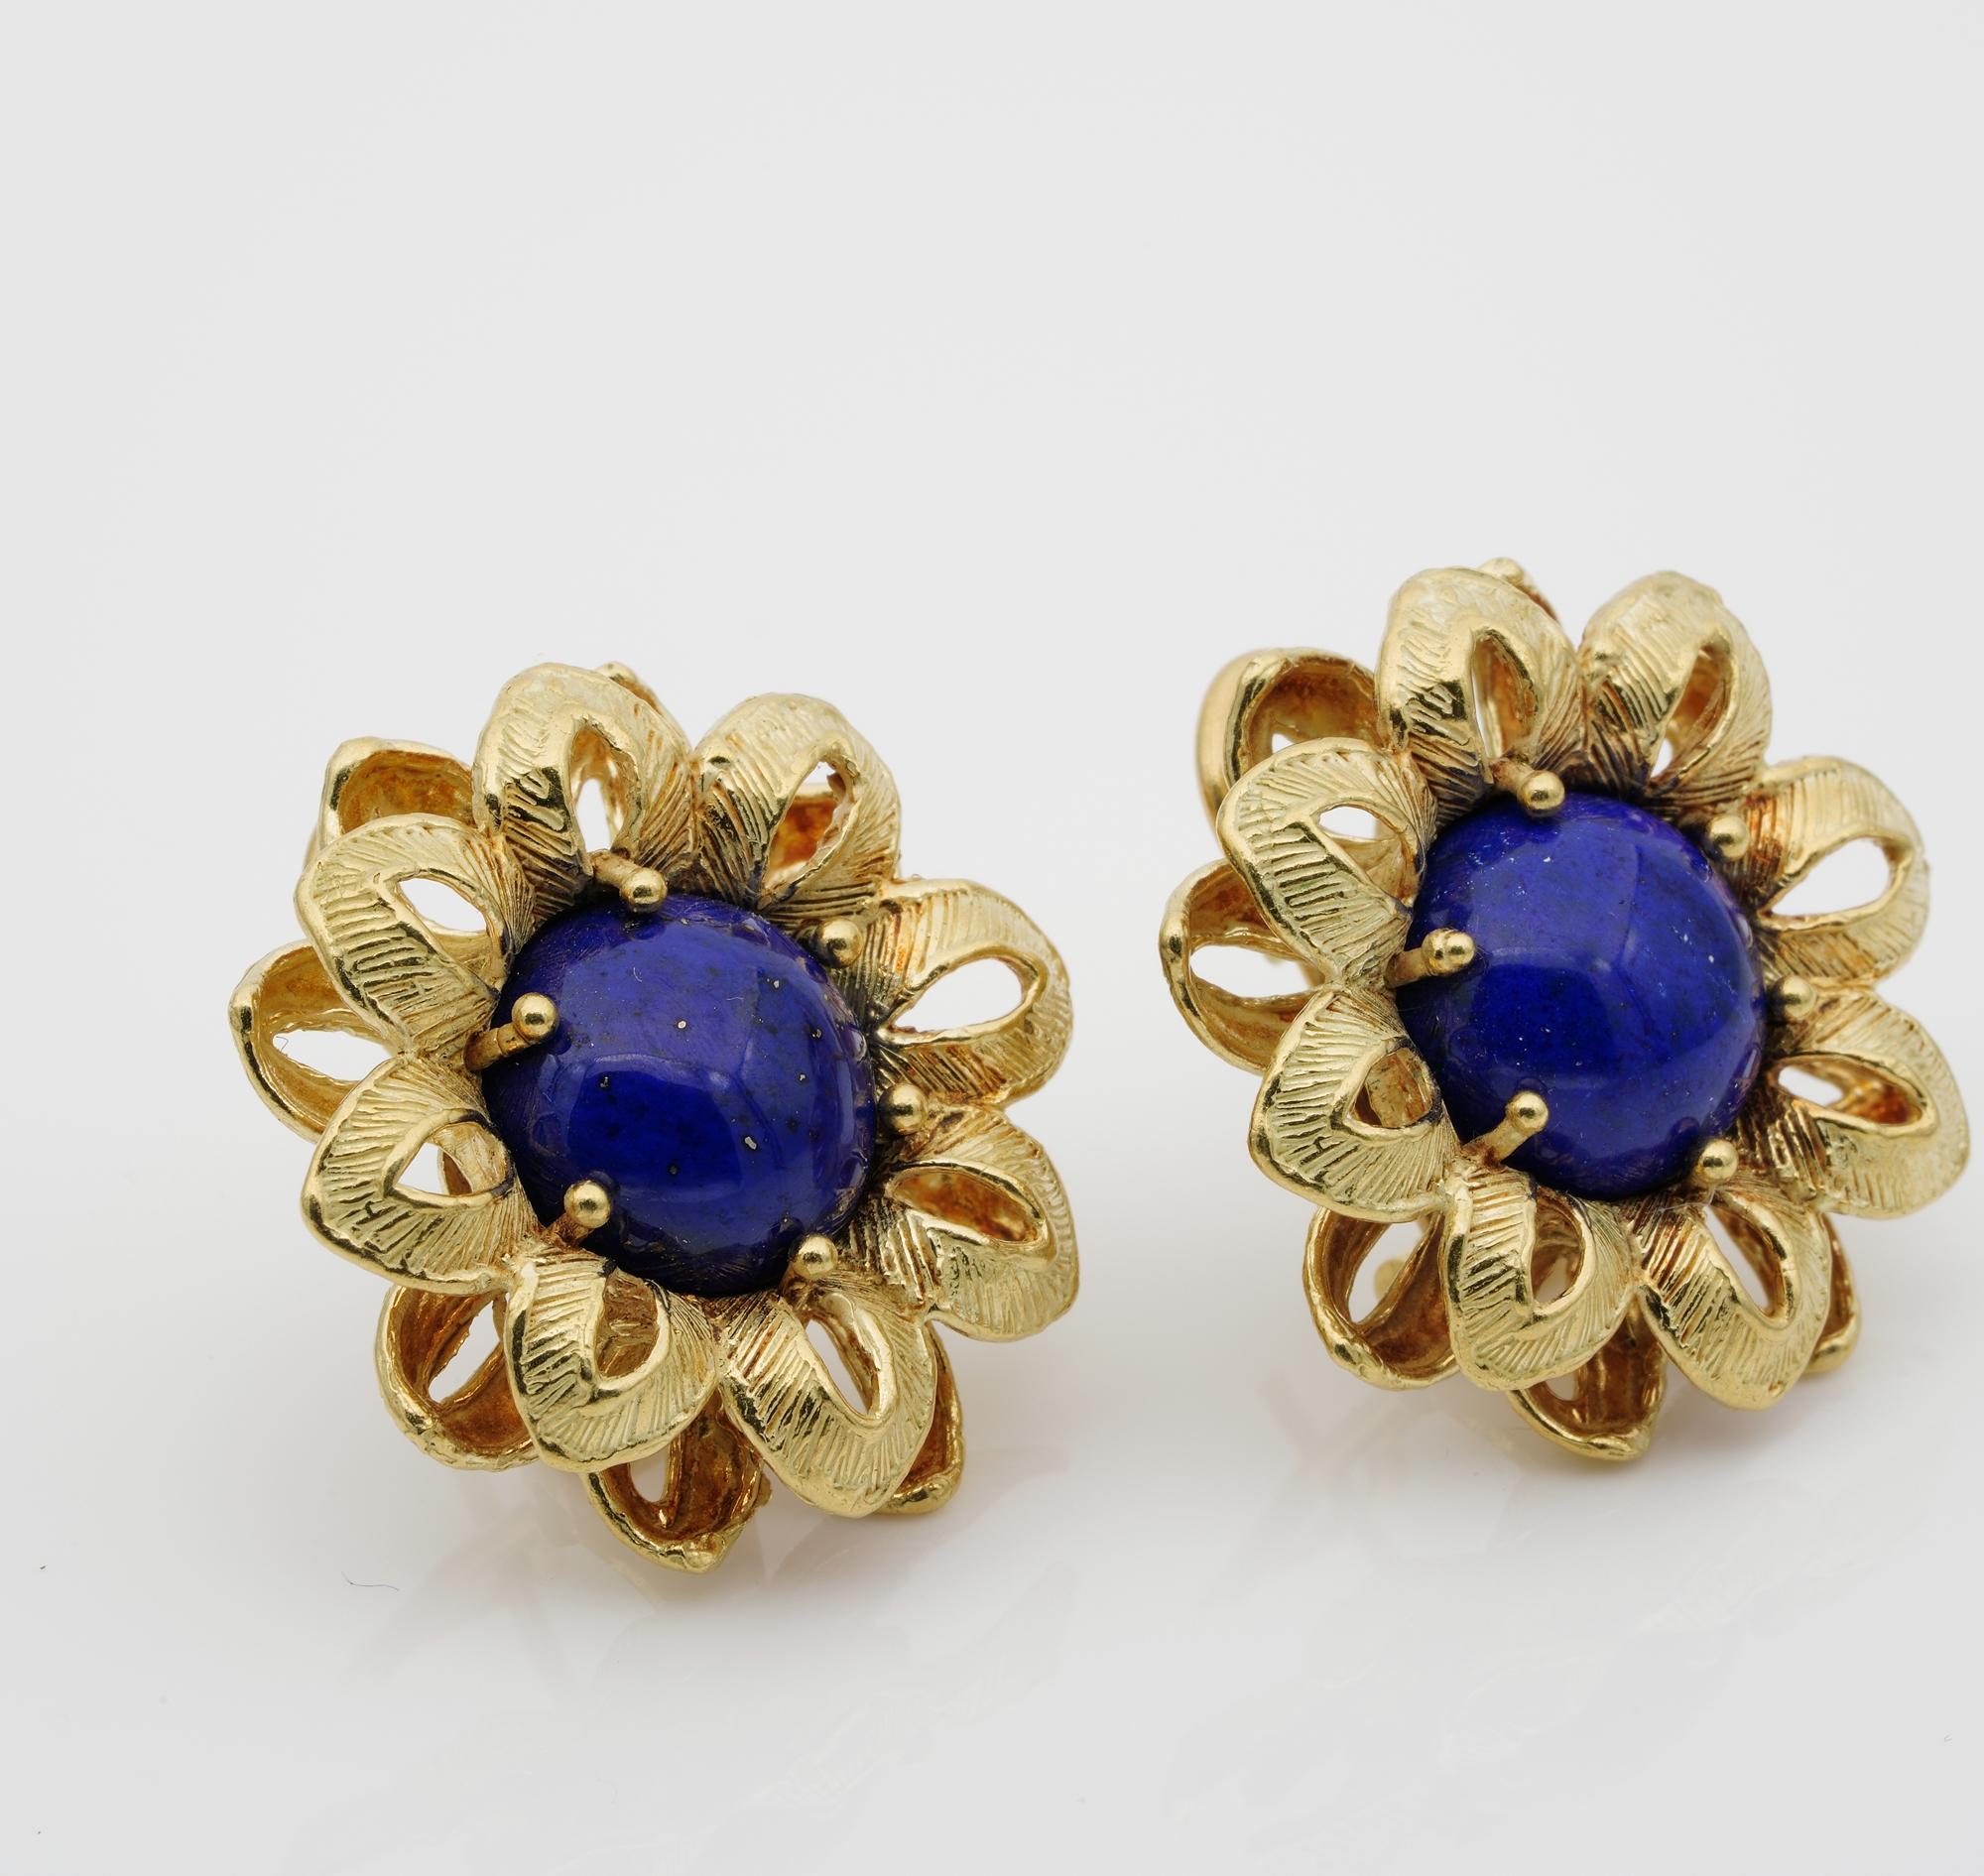 Italian Retro large carved flower earrings 1945 ca
18 KT solid gold
Flower shaped in a rich corolla of petals to complement Lapislazuli of rich royal Blue
The two cabochon cut measuring 11 mm in diameter
Charming in design and artistry hand